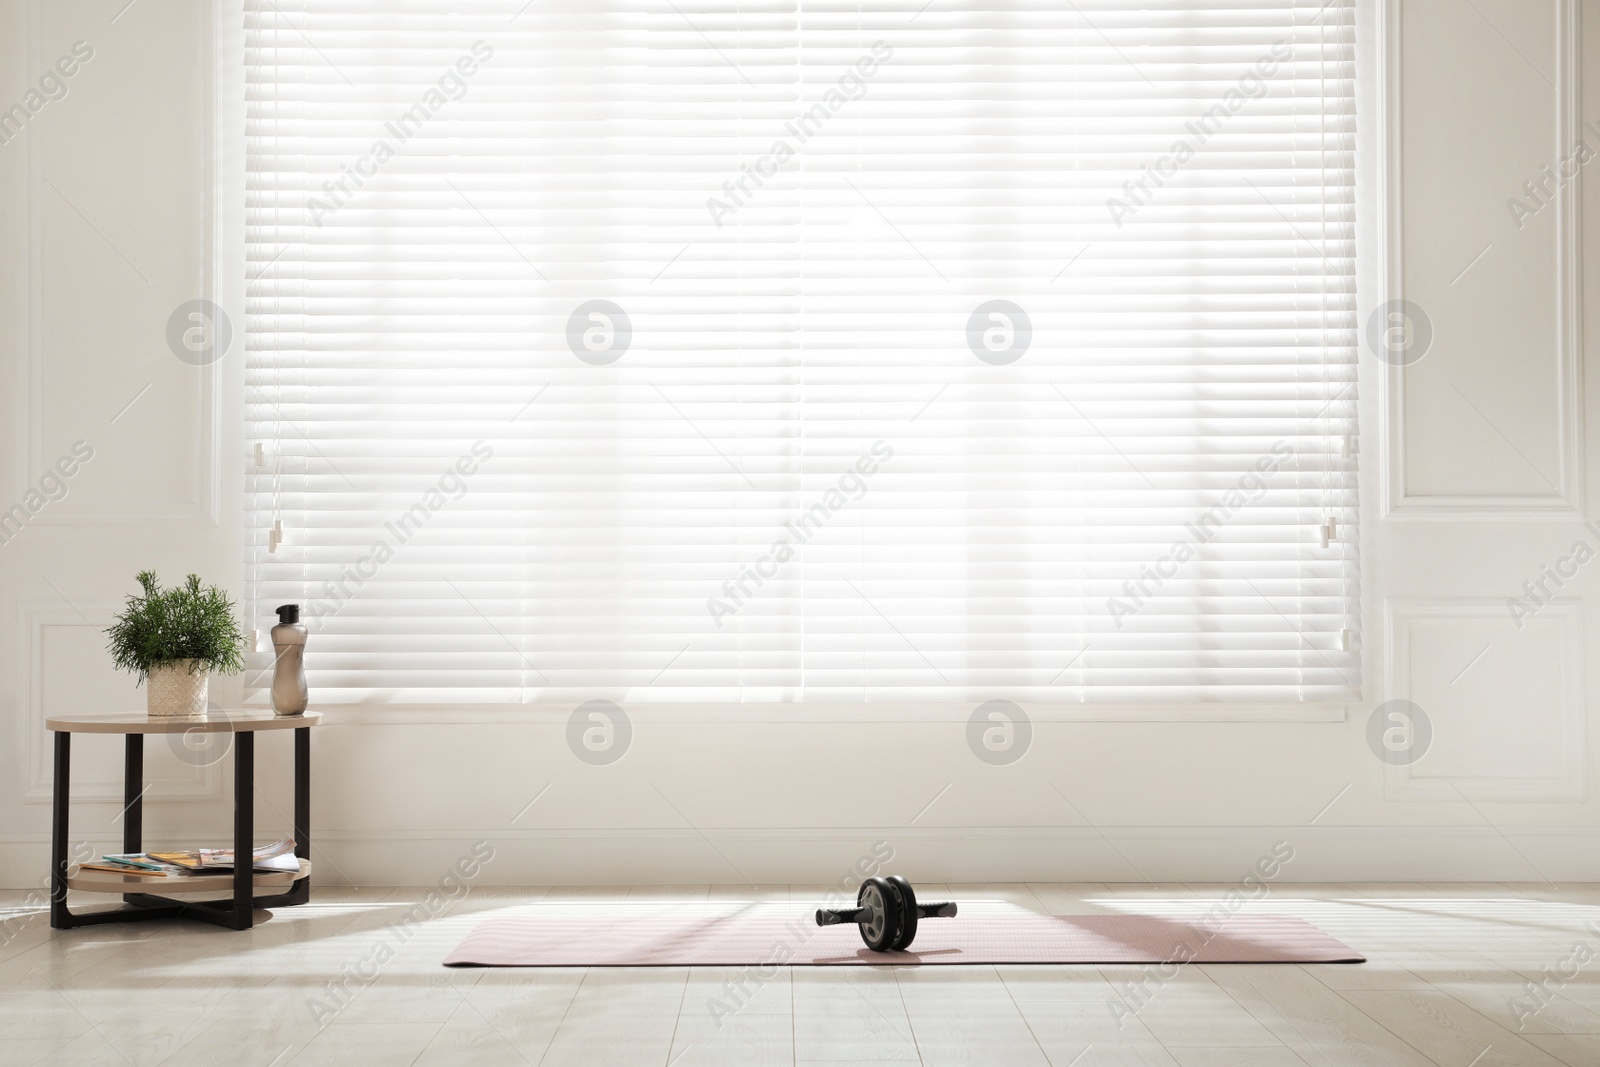 Photo of Exercise mat with ab roller near window in spacious room